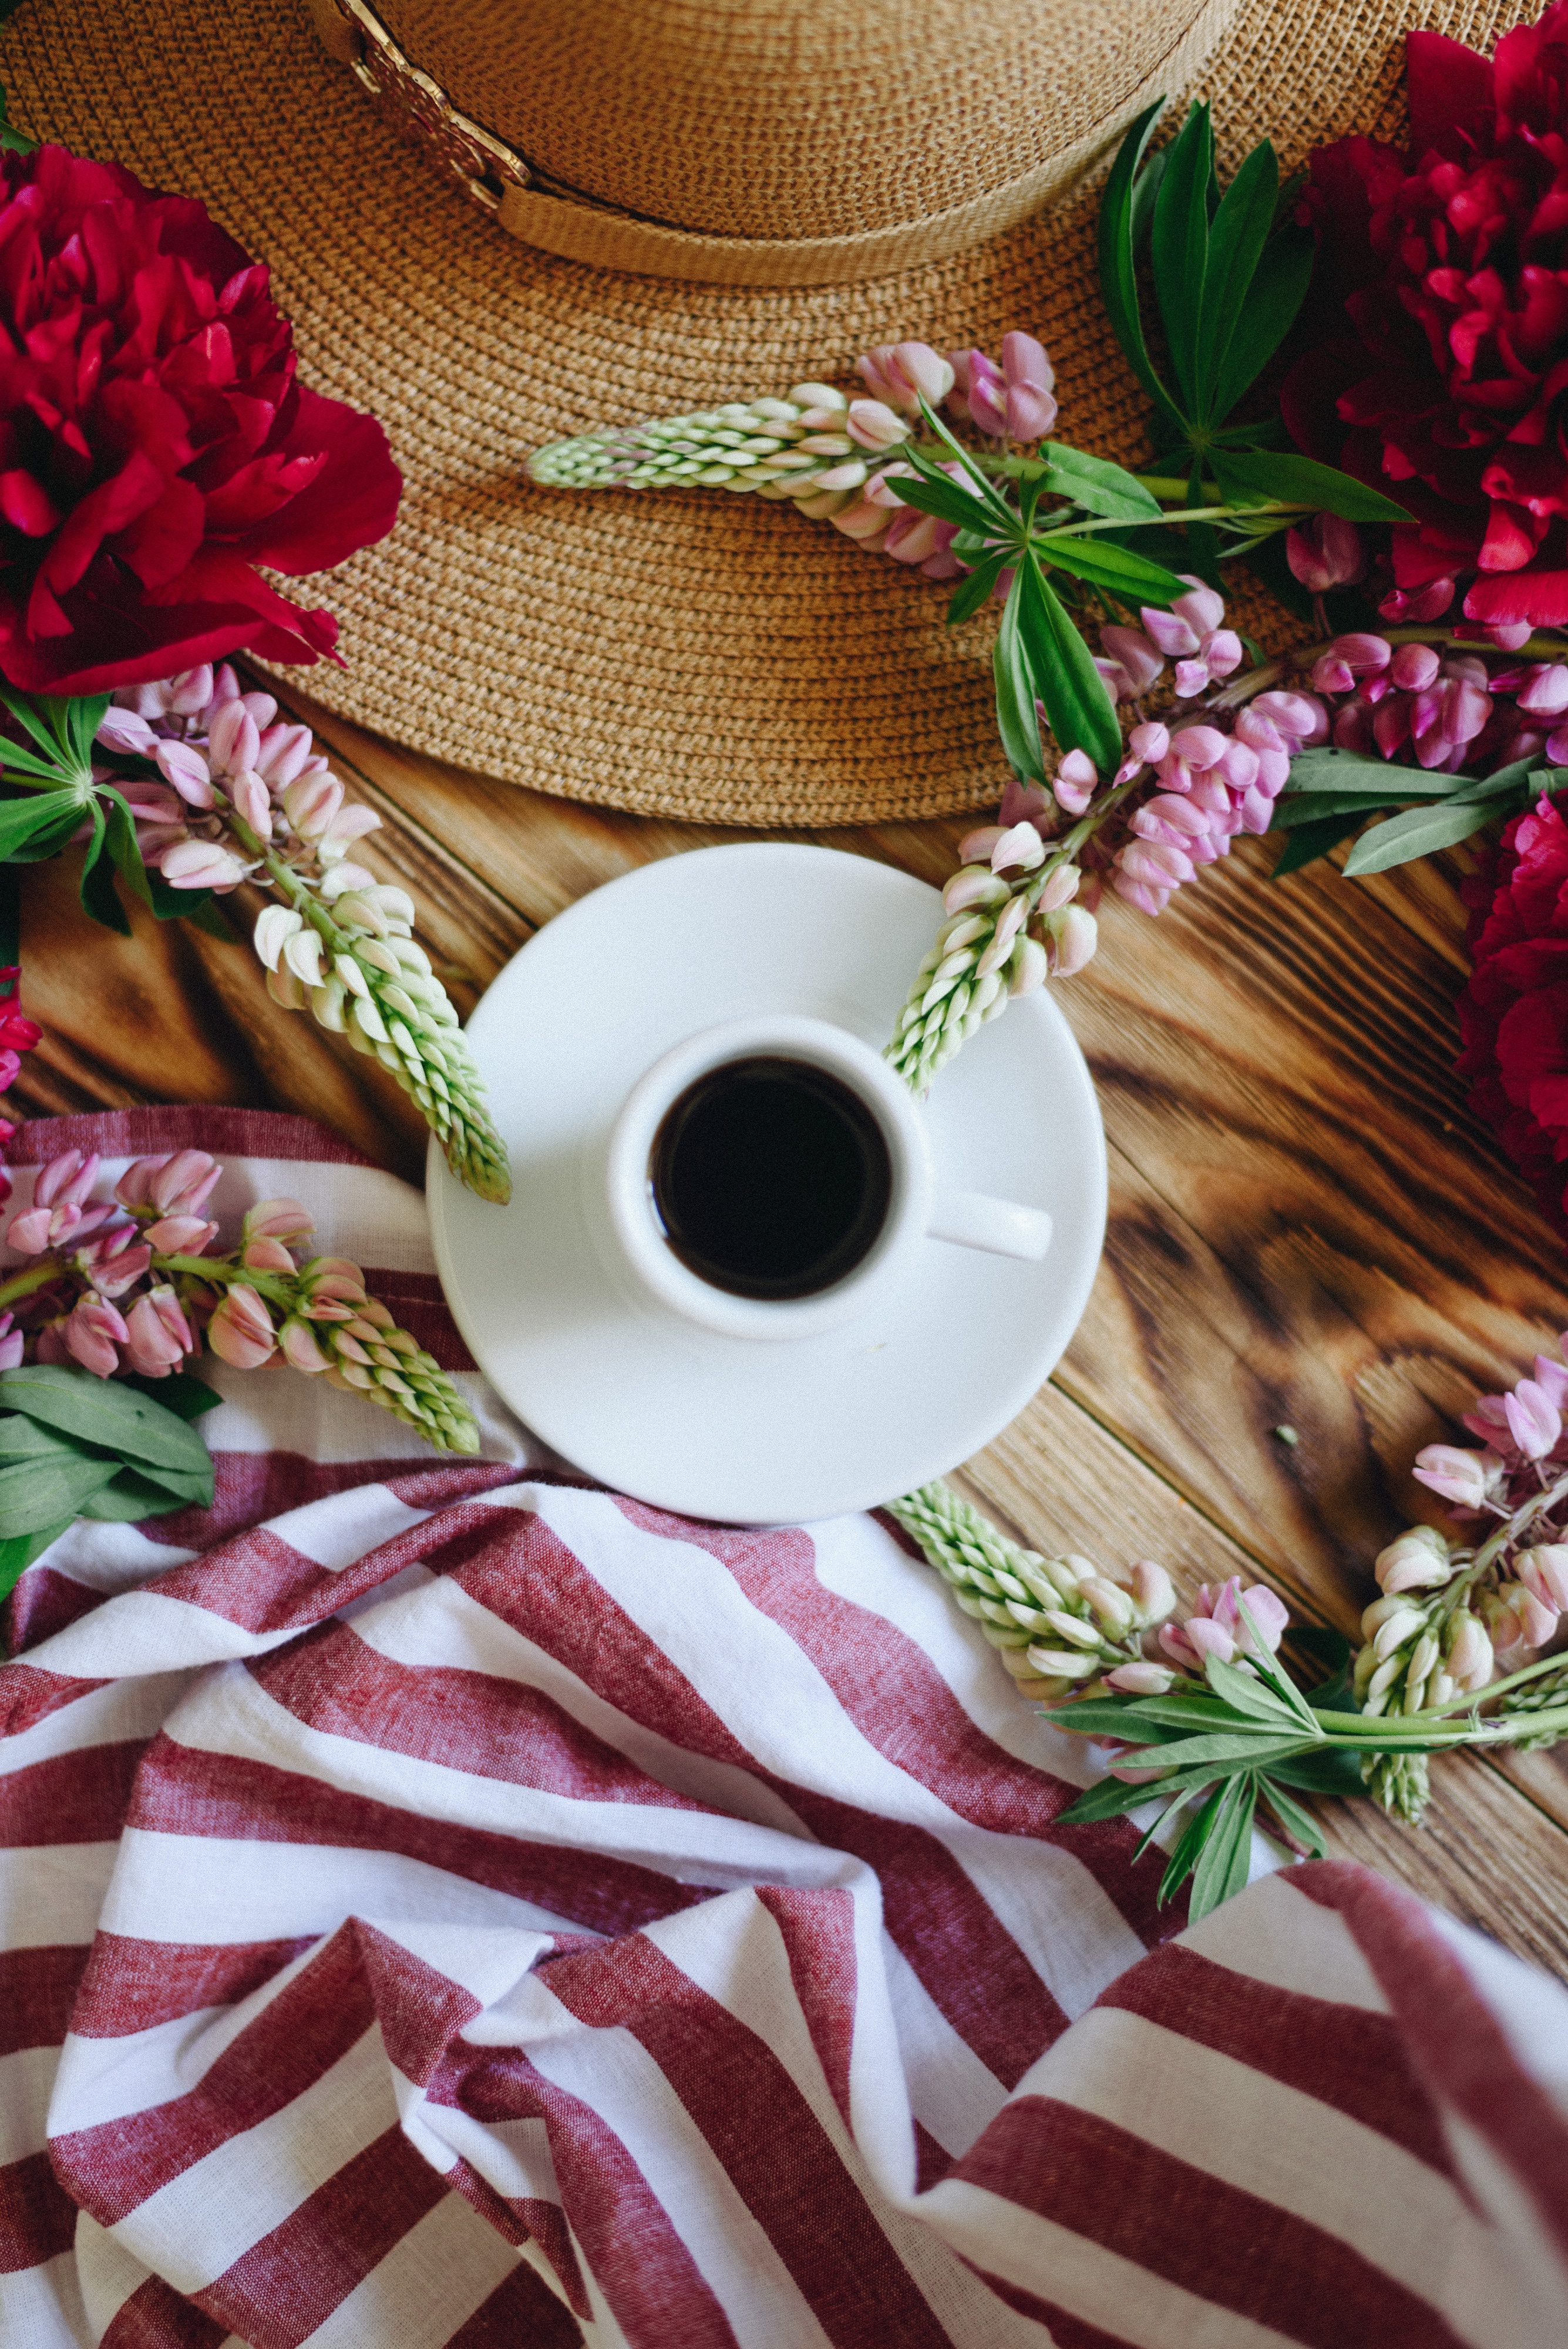 cup, hat, flowers, food, table phone background